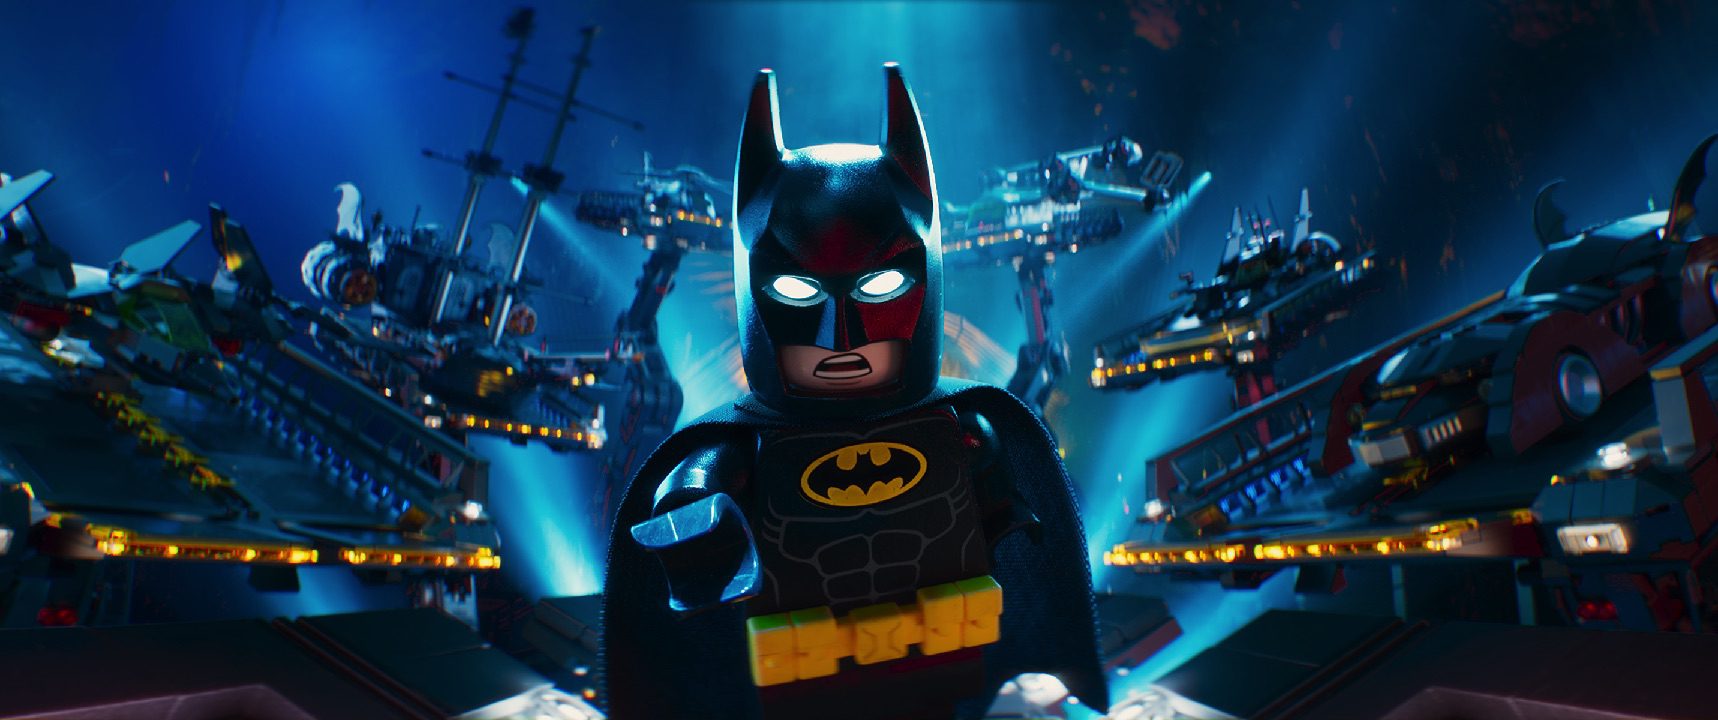 Batman (Will Arnett) and his toys in The Lego Batman Movie. (Warner Bros Pictures)